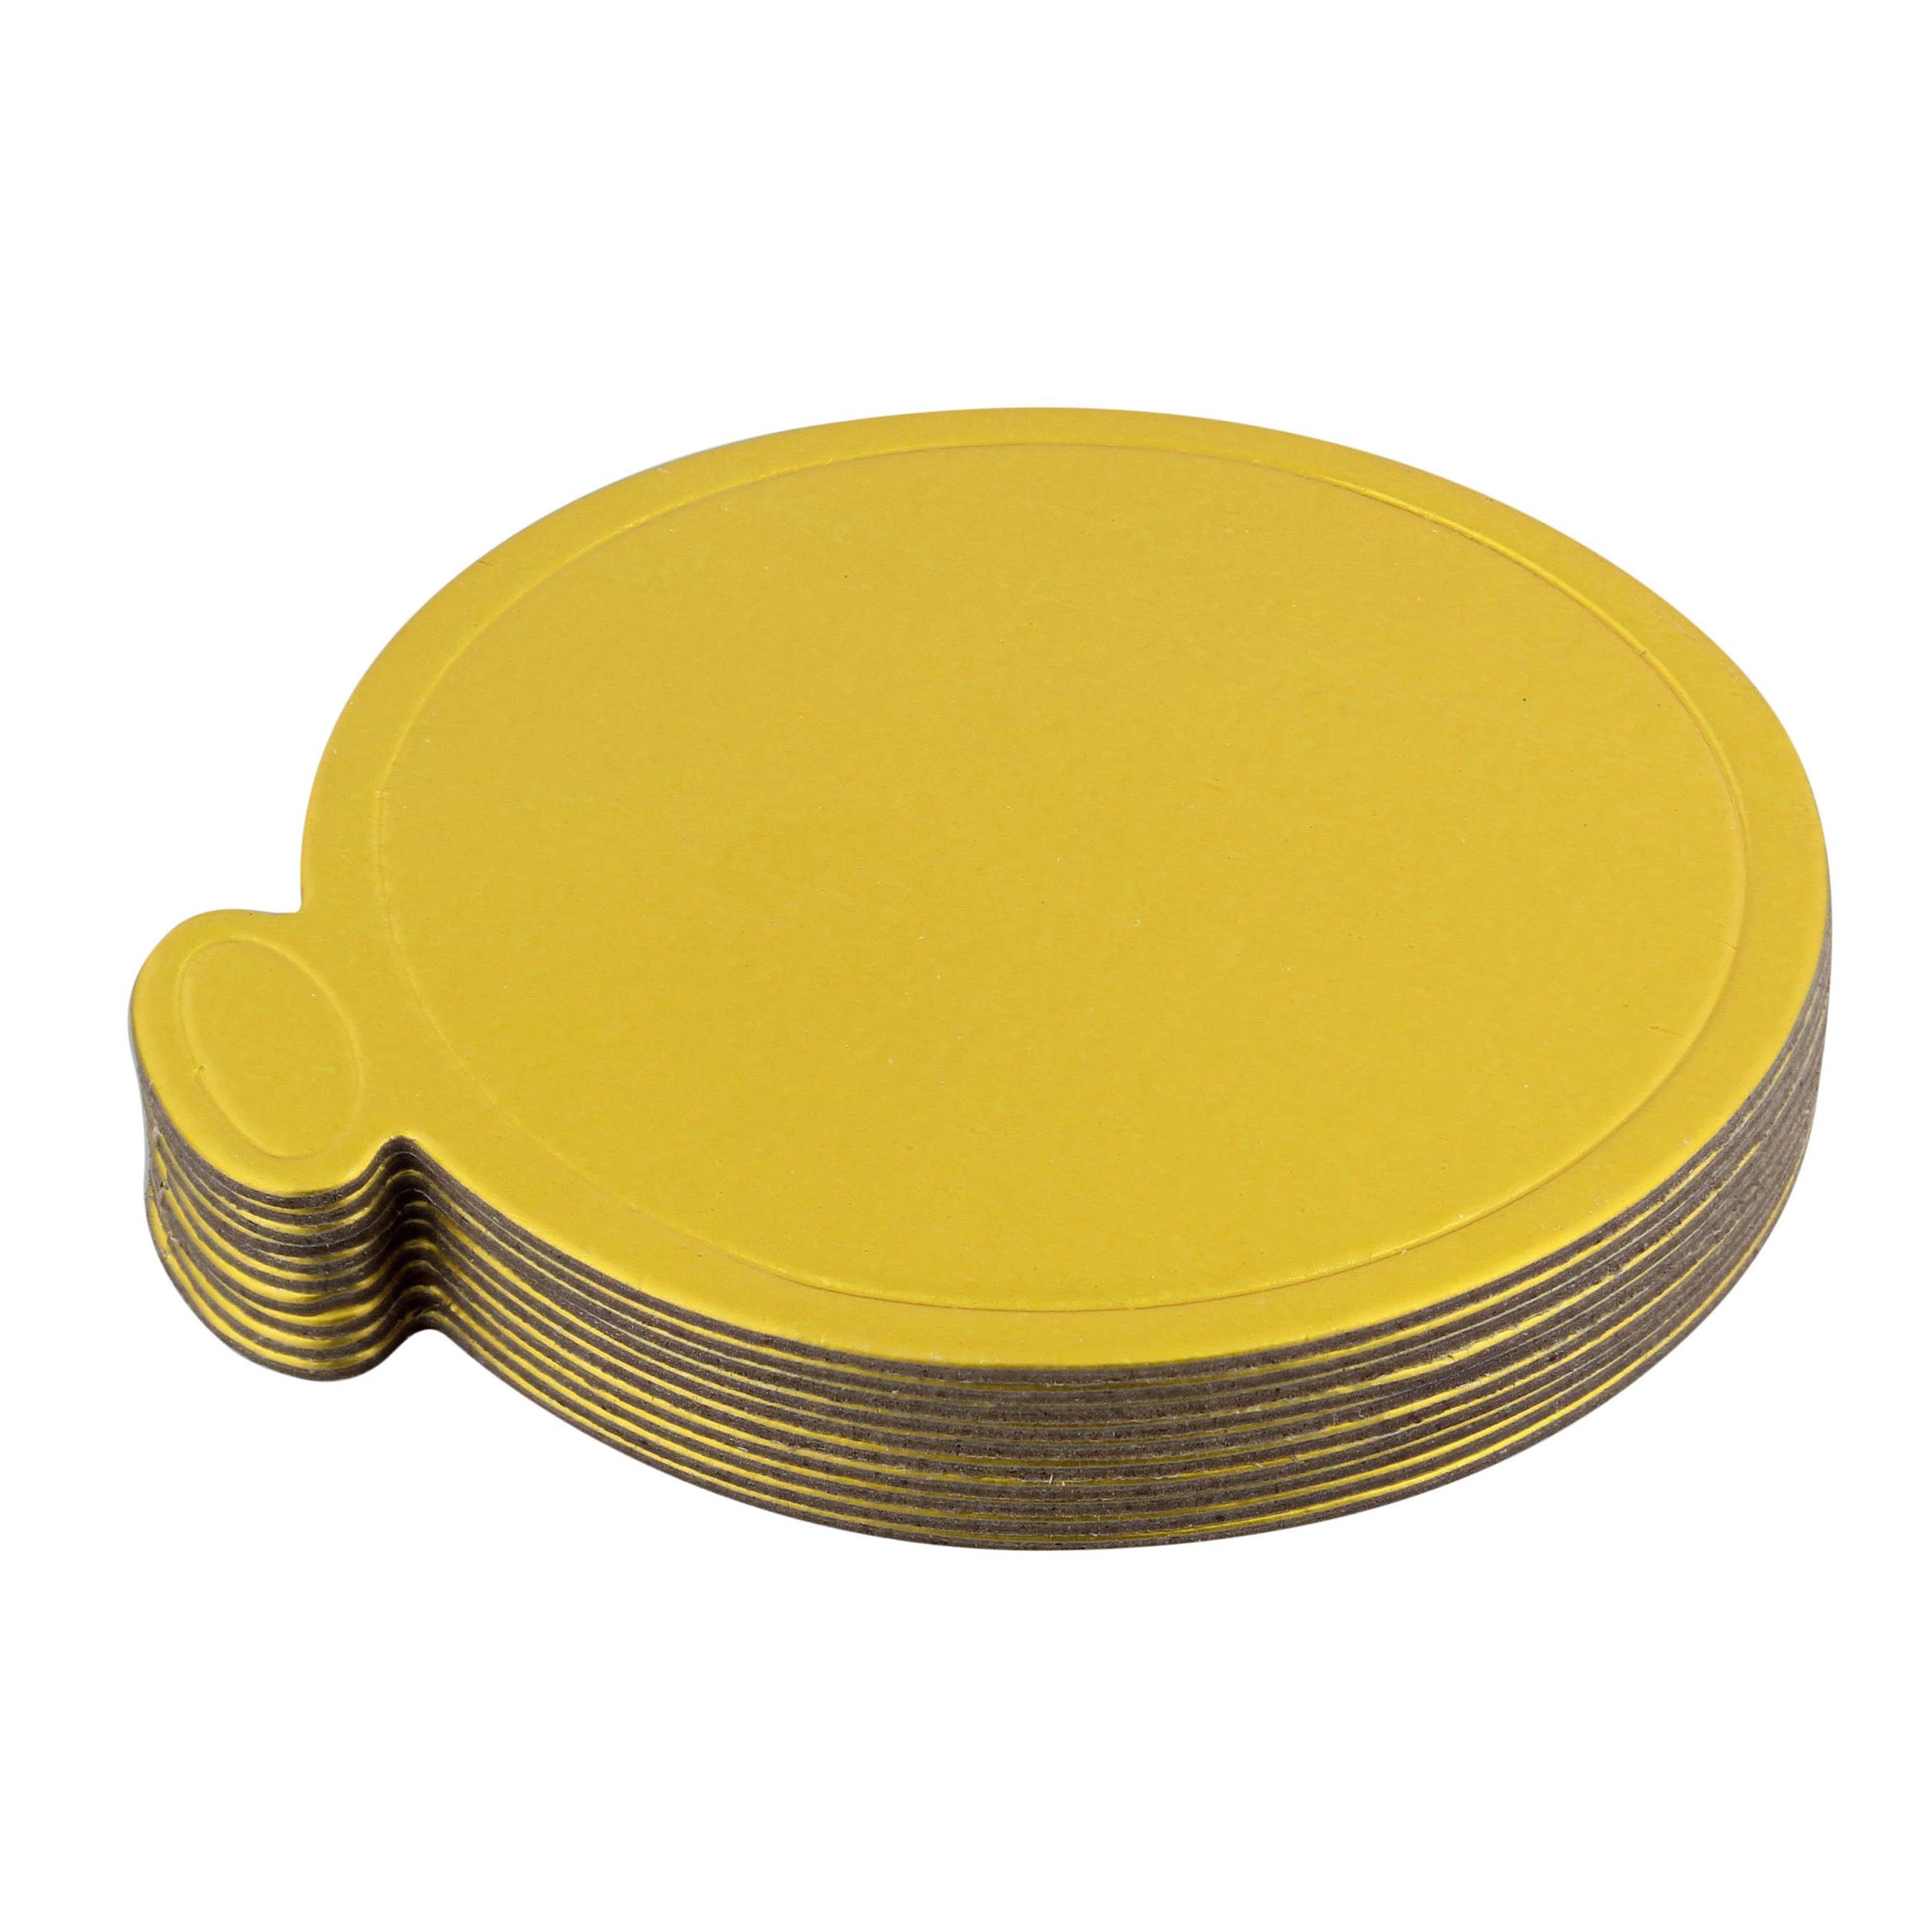 Spec101 Round Cake Boards Bulk 20pk - 12 Inch Cake Drum Round Gold  Cardboard Base with Flat Scalloped Foil Edge Display